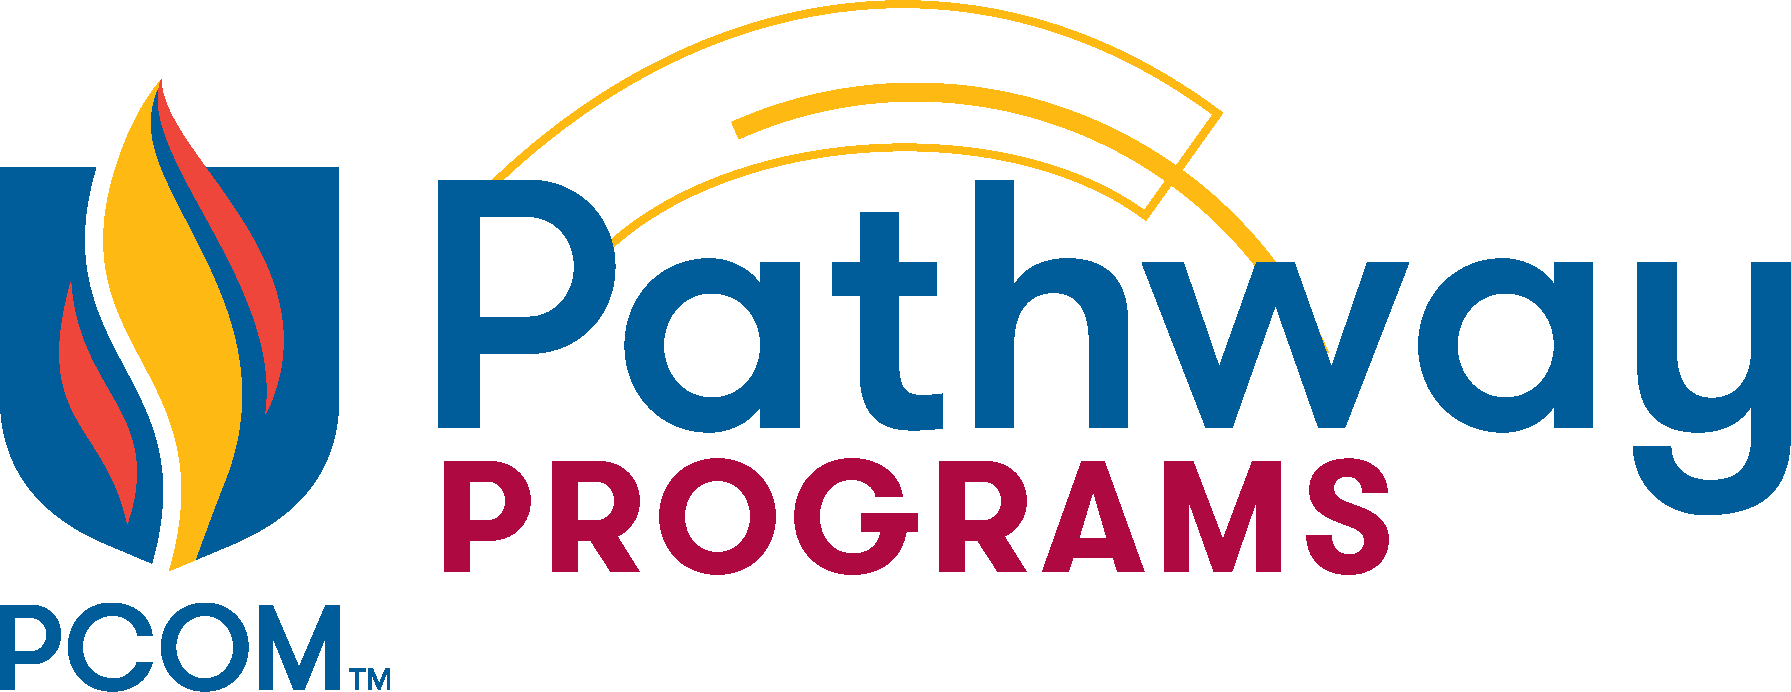 PCOM Pathway Programs logo with PCOM flame logo and vector artwork elements